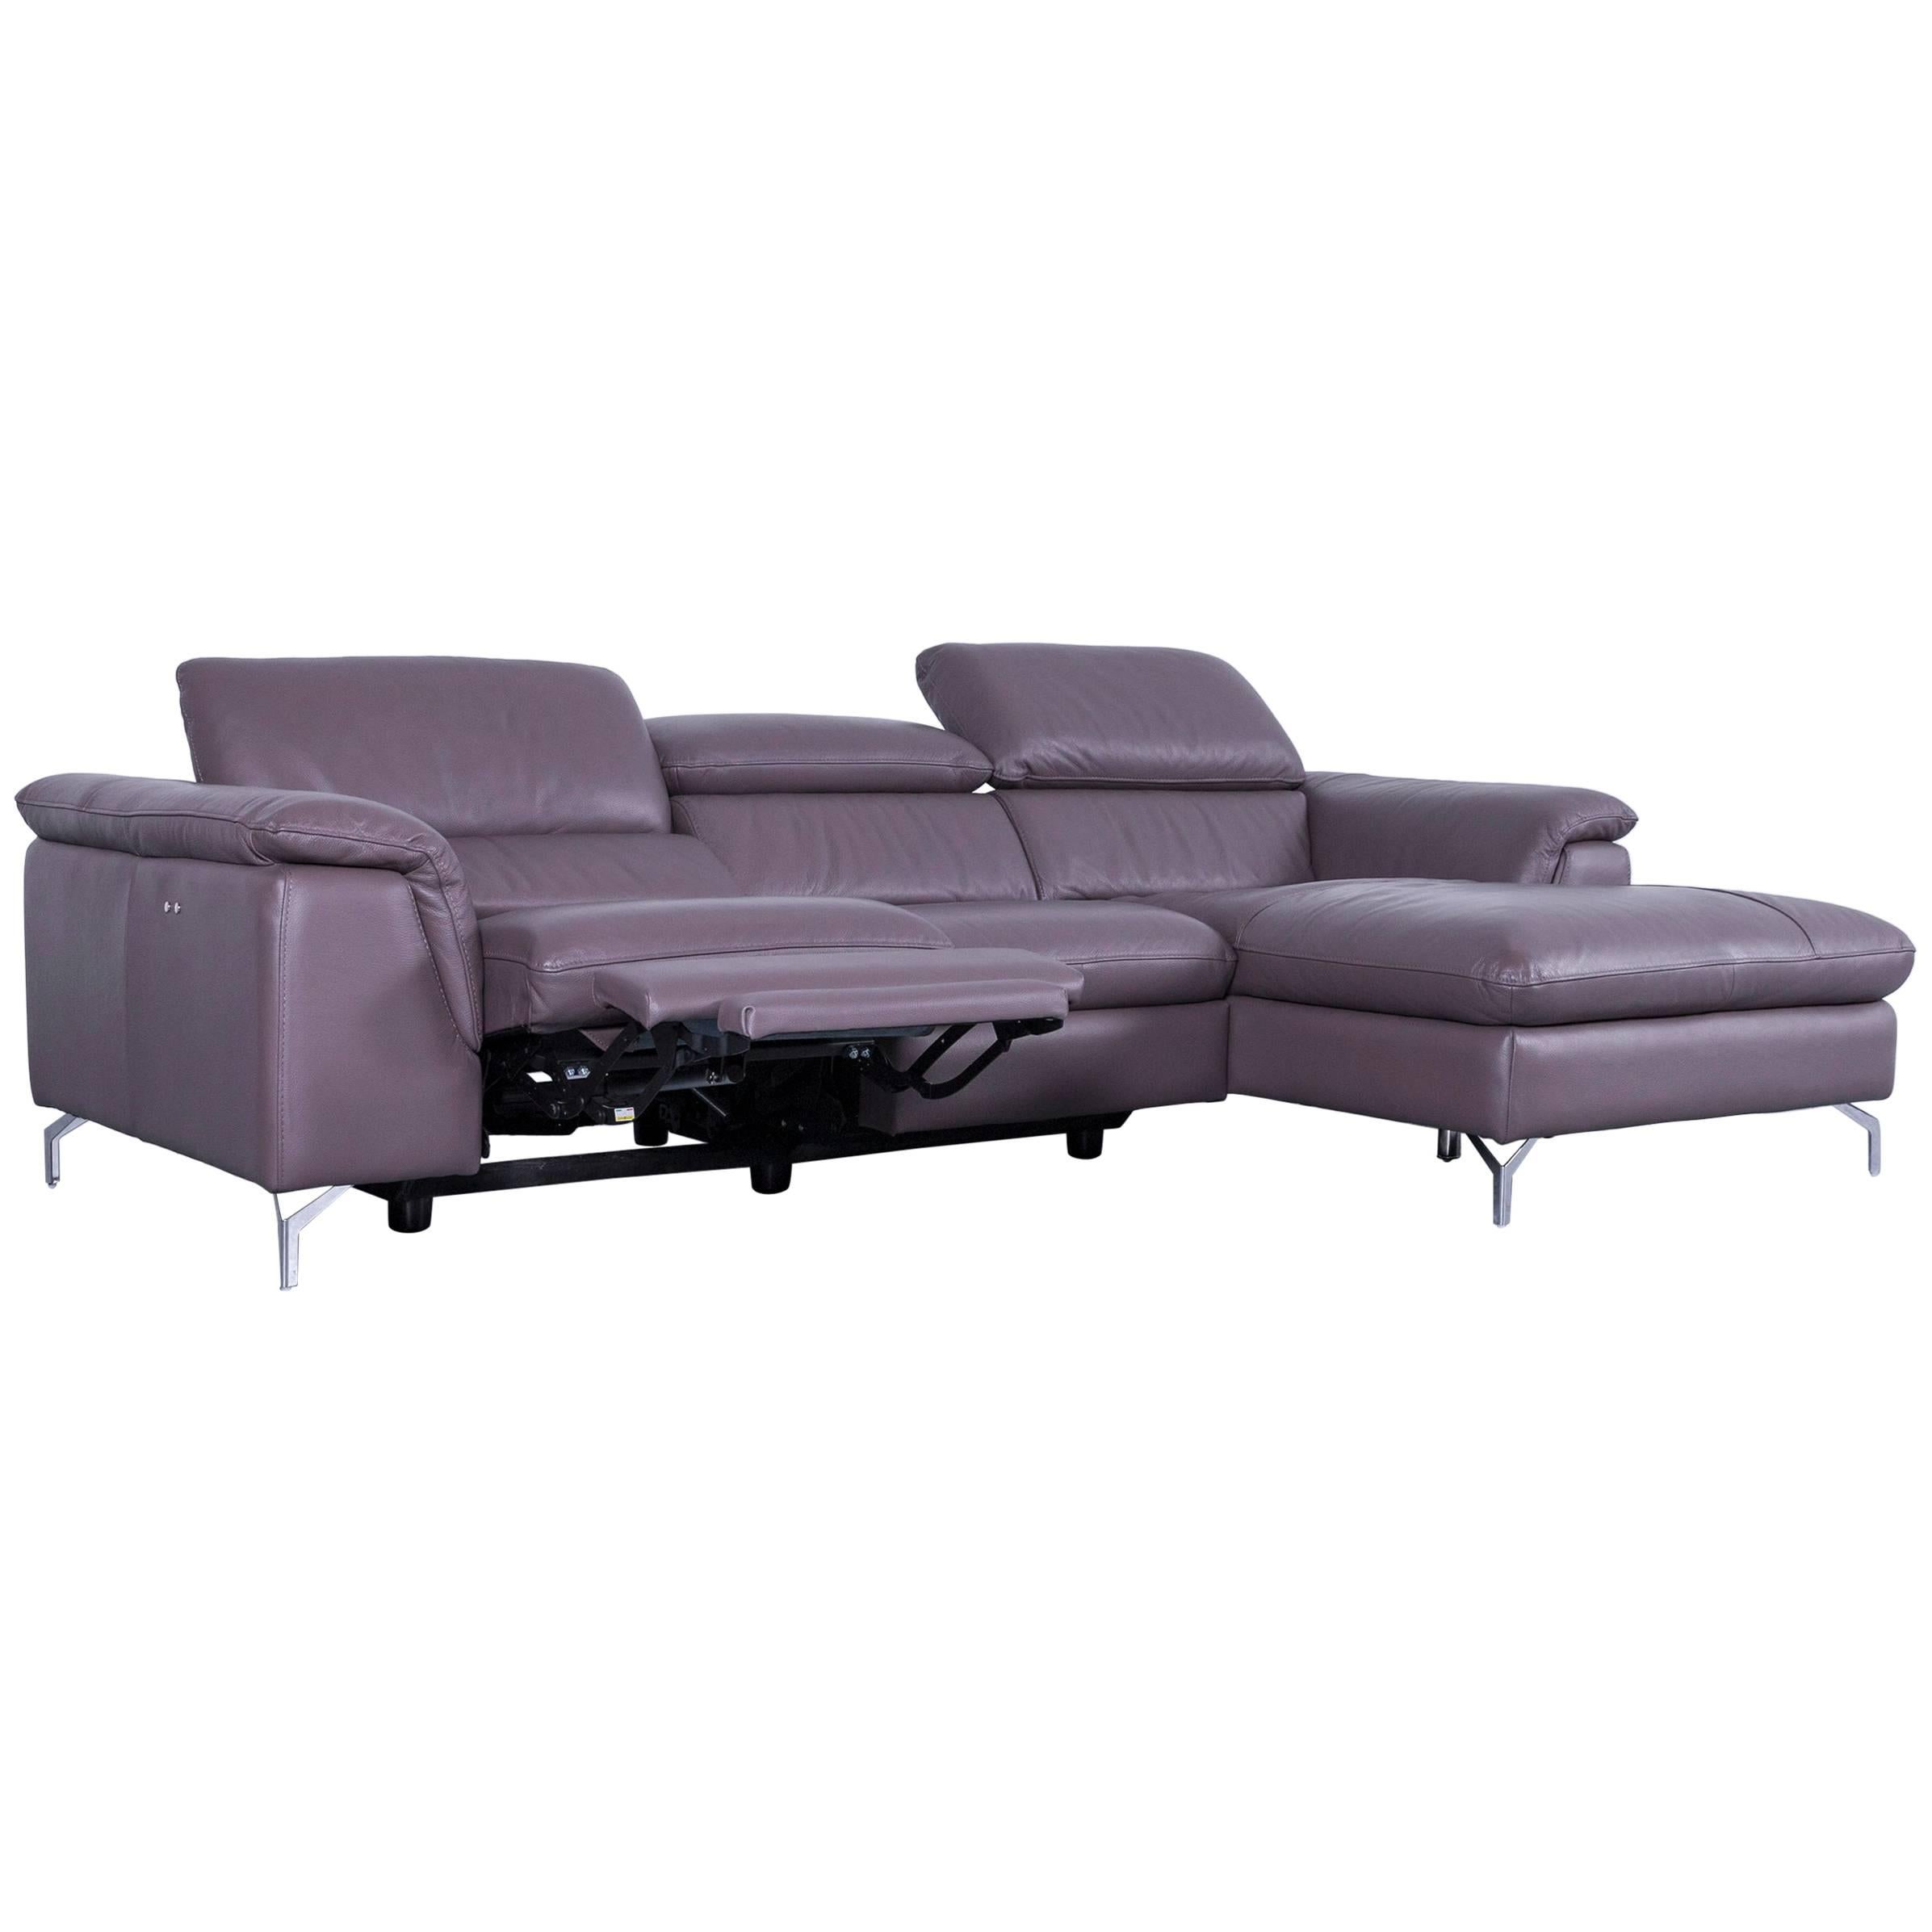 Designer Corner Sofa Grey Brown Taupe Leather with Electric Recliner Functions